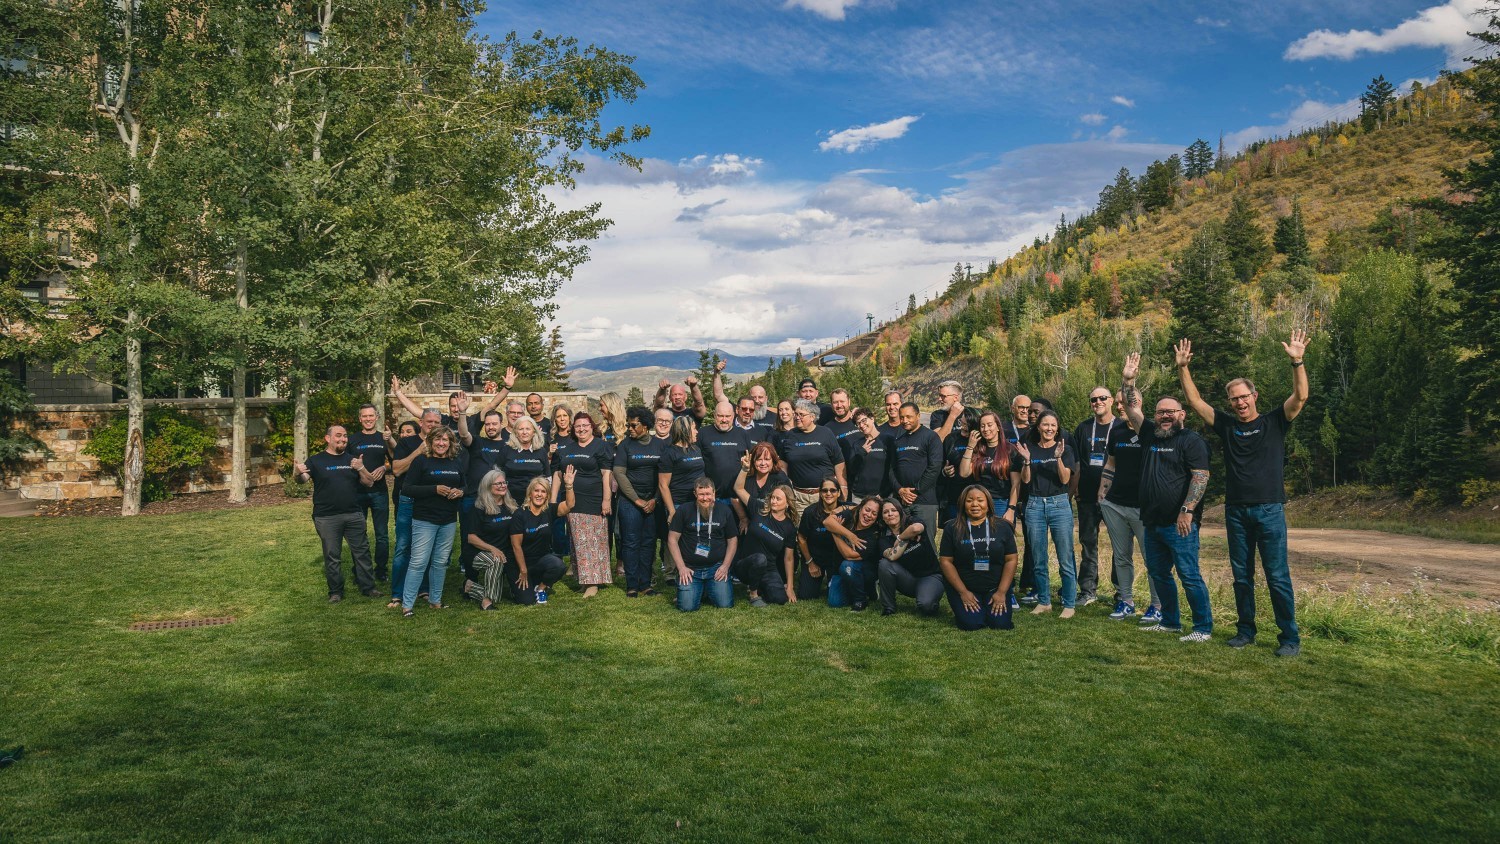 Group photo at 2022 Partnership Forum in Park City, UT